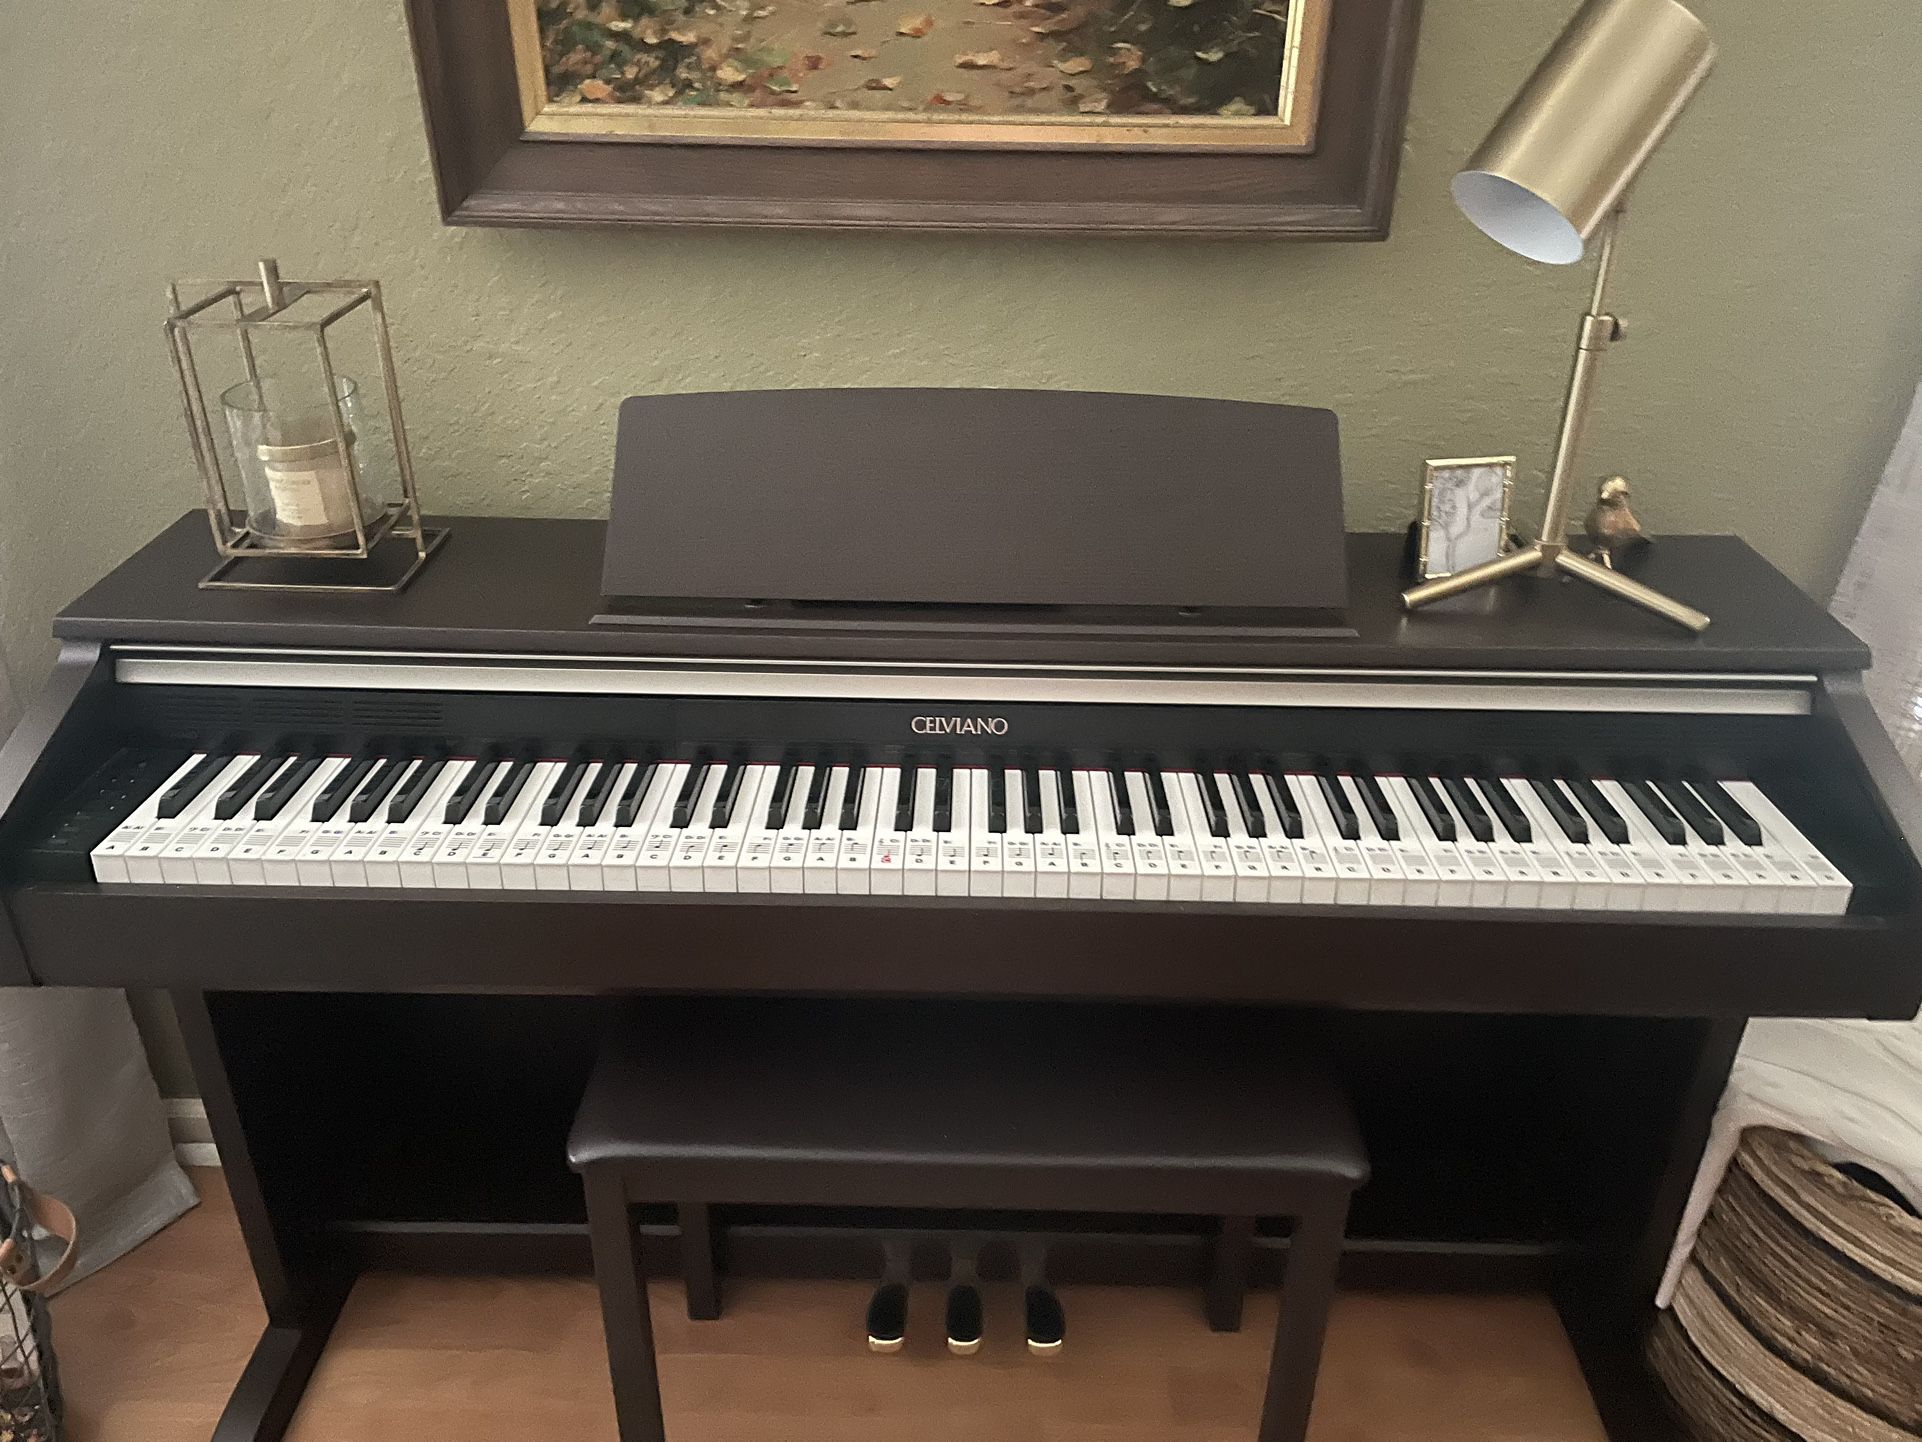 Casio Celviano Electric Piano With Bench